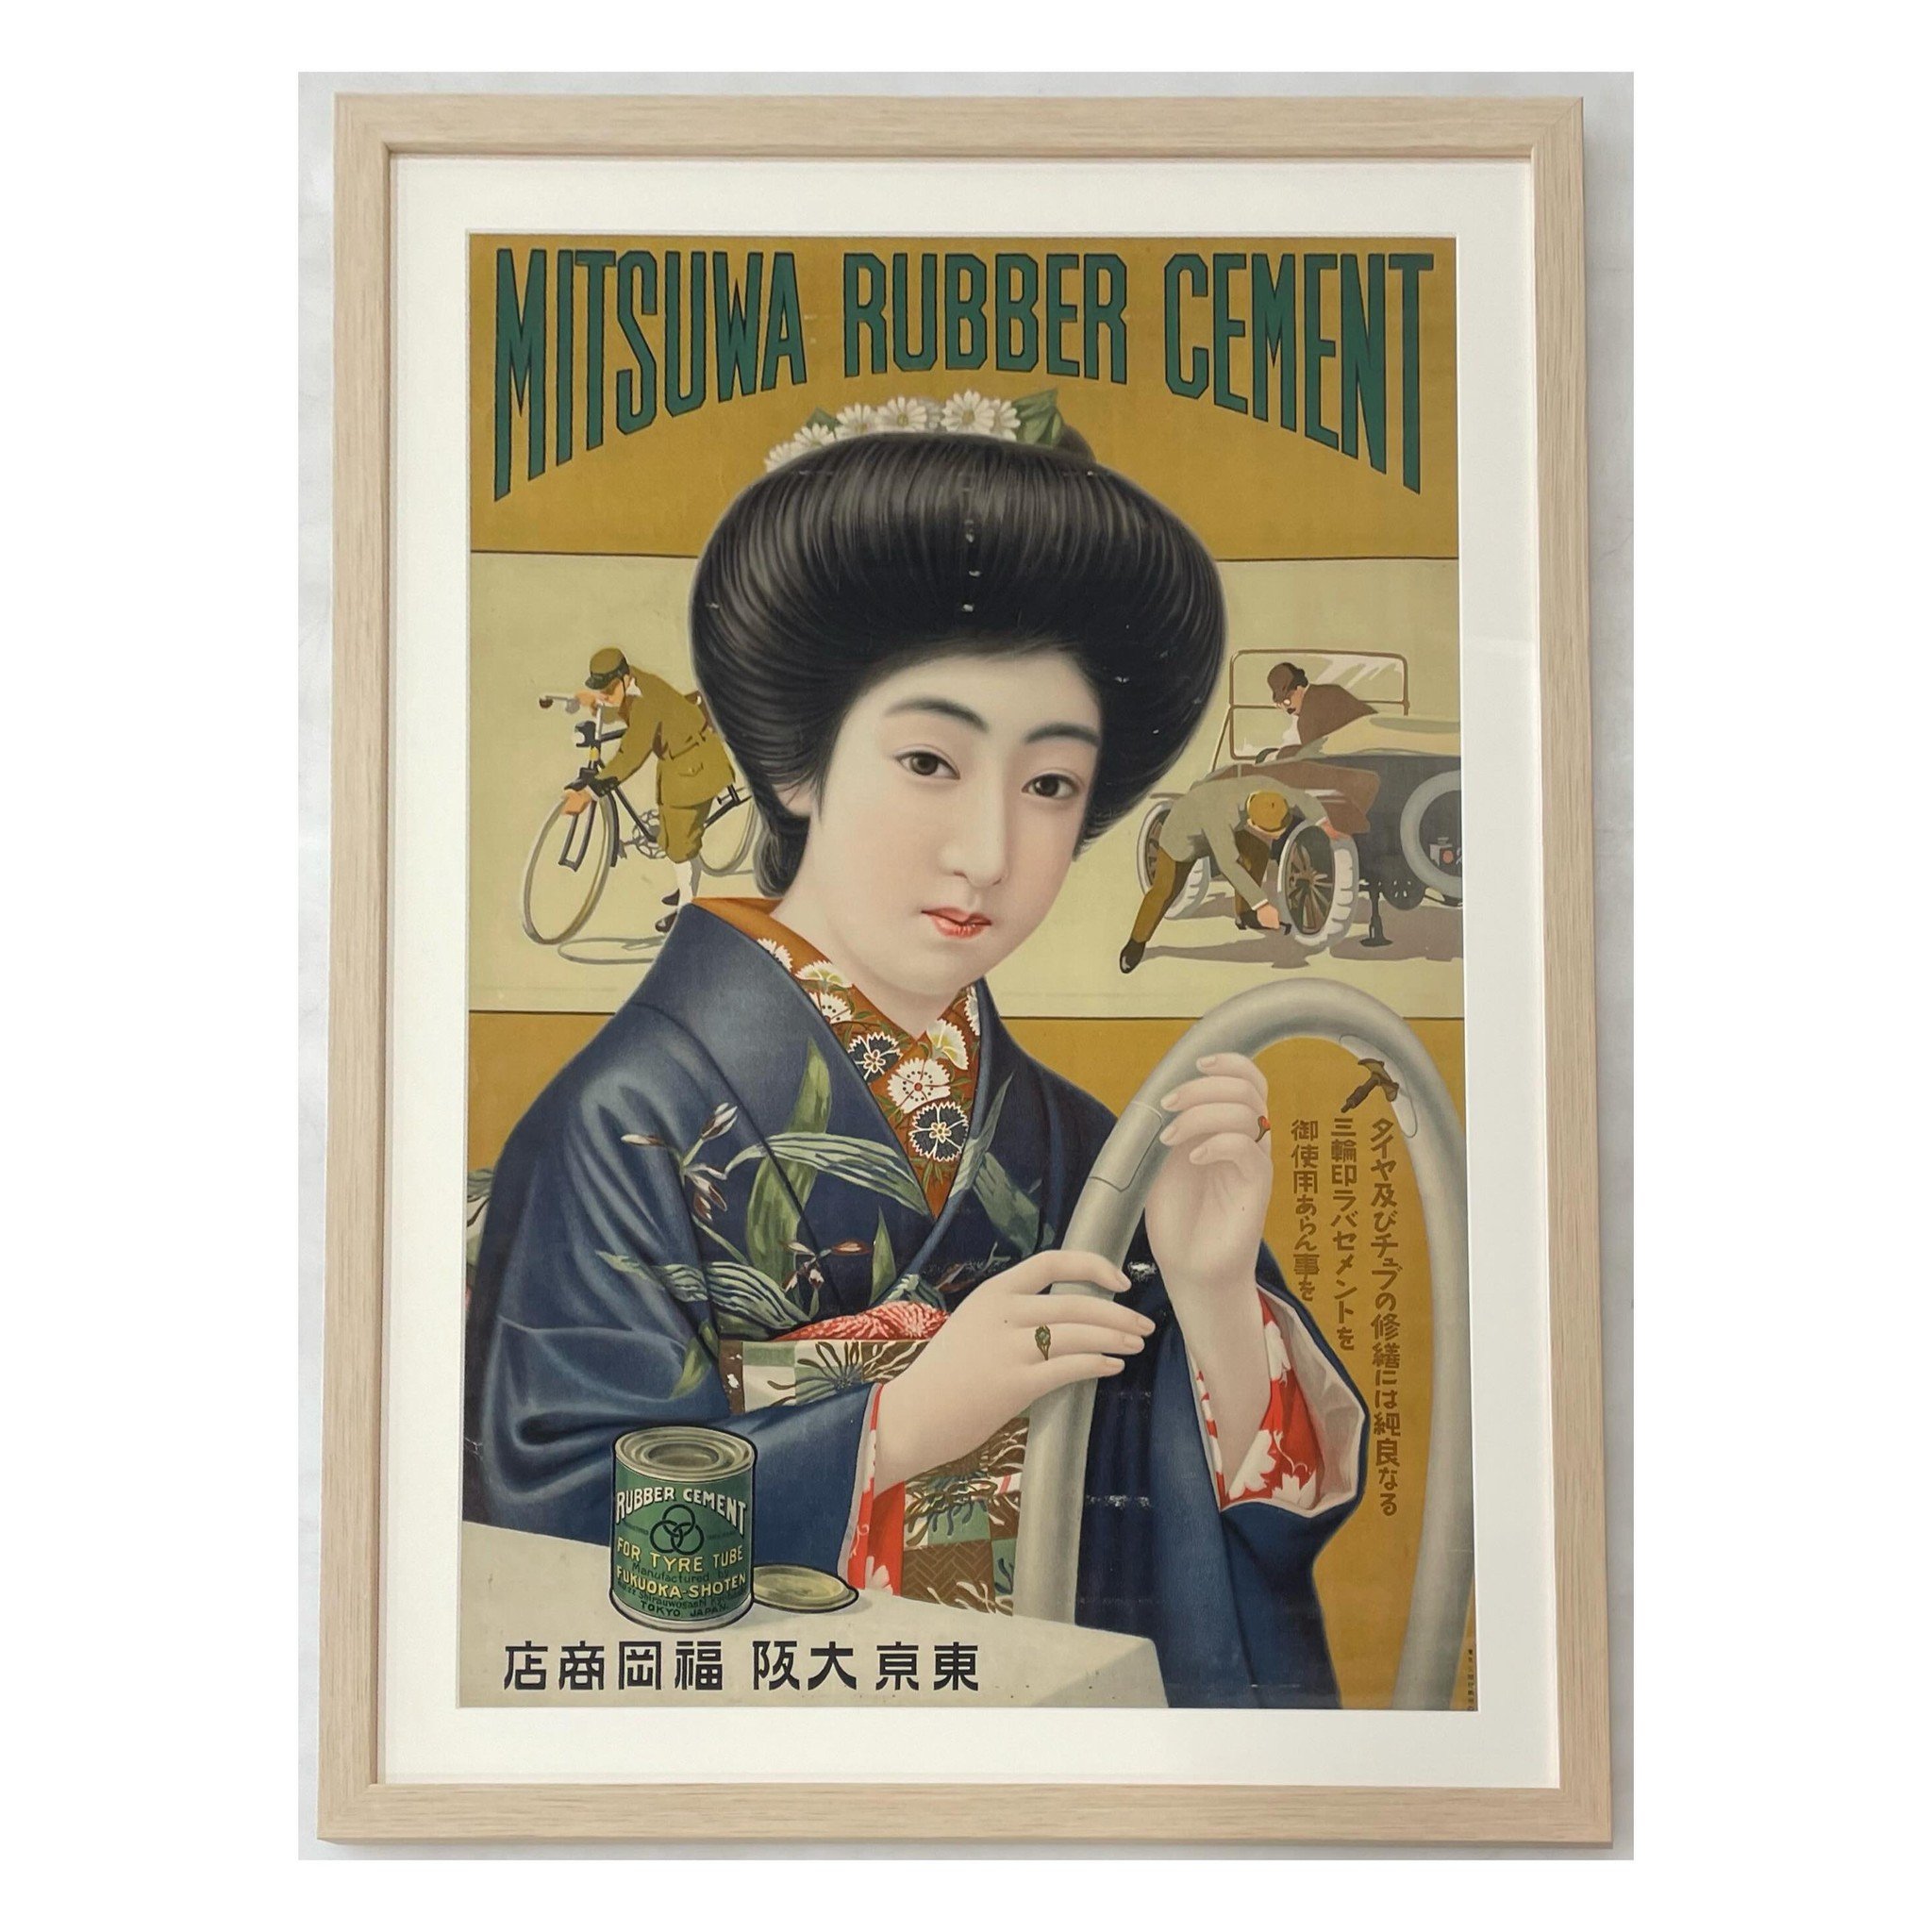 Happy Friday everyone! We hope you&rsquo;ve had a great week so far ✨

Check out this beautiful vintage poster our designer @scottwmsimmons worked with! 🛵

Our customer brought this turn of the century Mitsuwa Rubber Cement advertisement poster in t